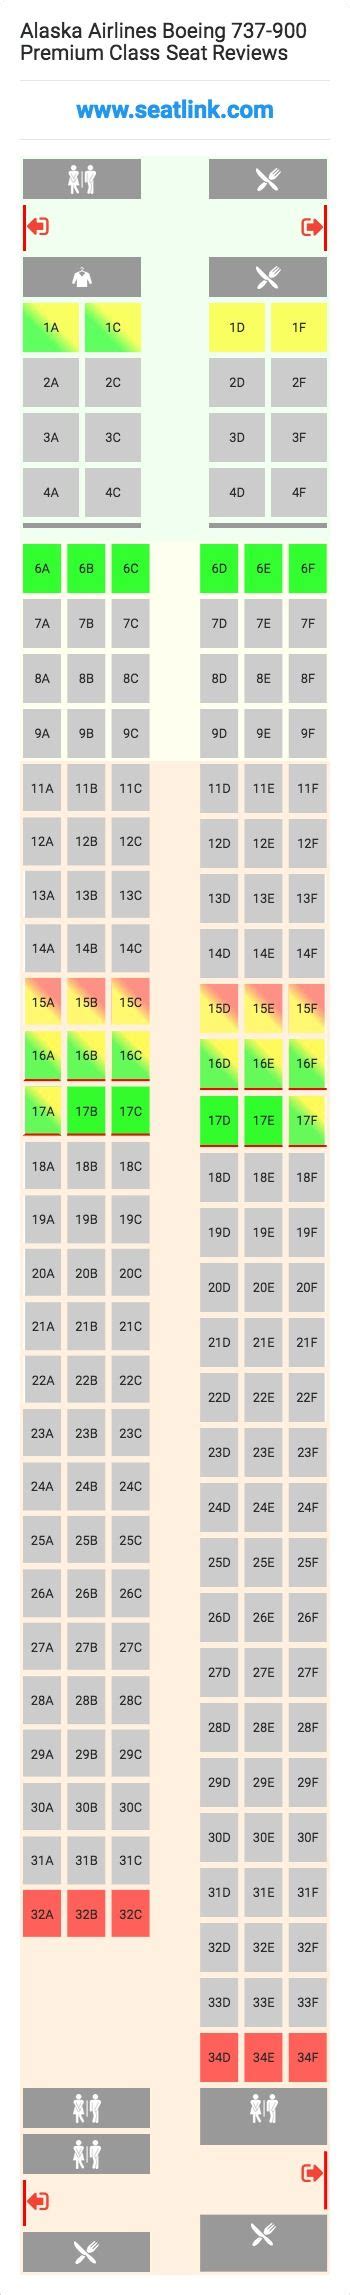 Alaska Airlines Seating Chart 737 900